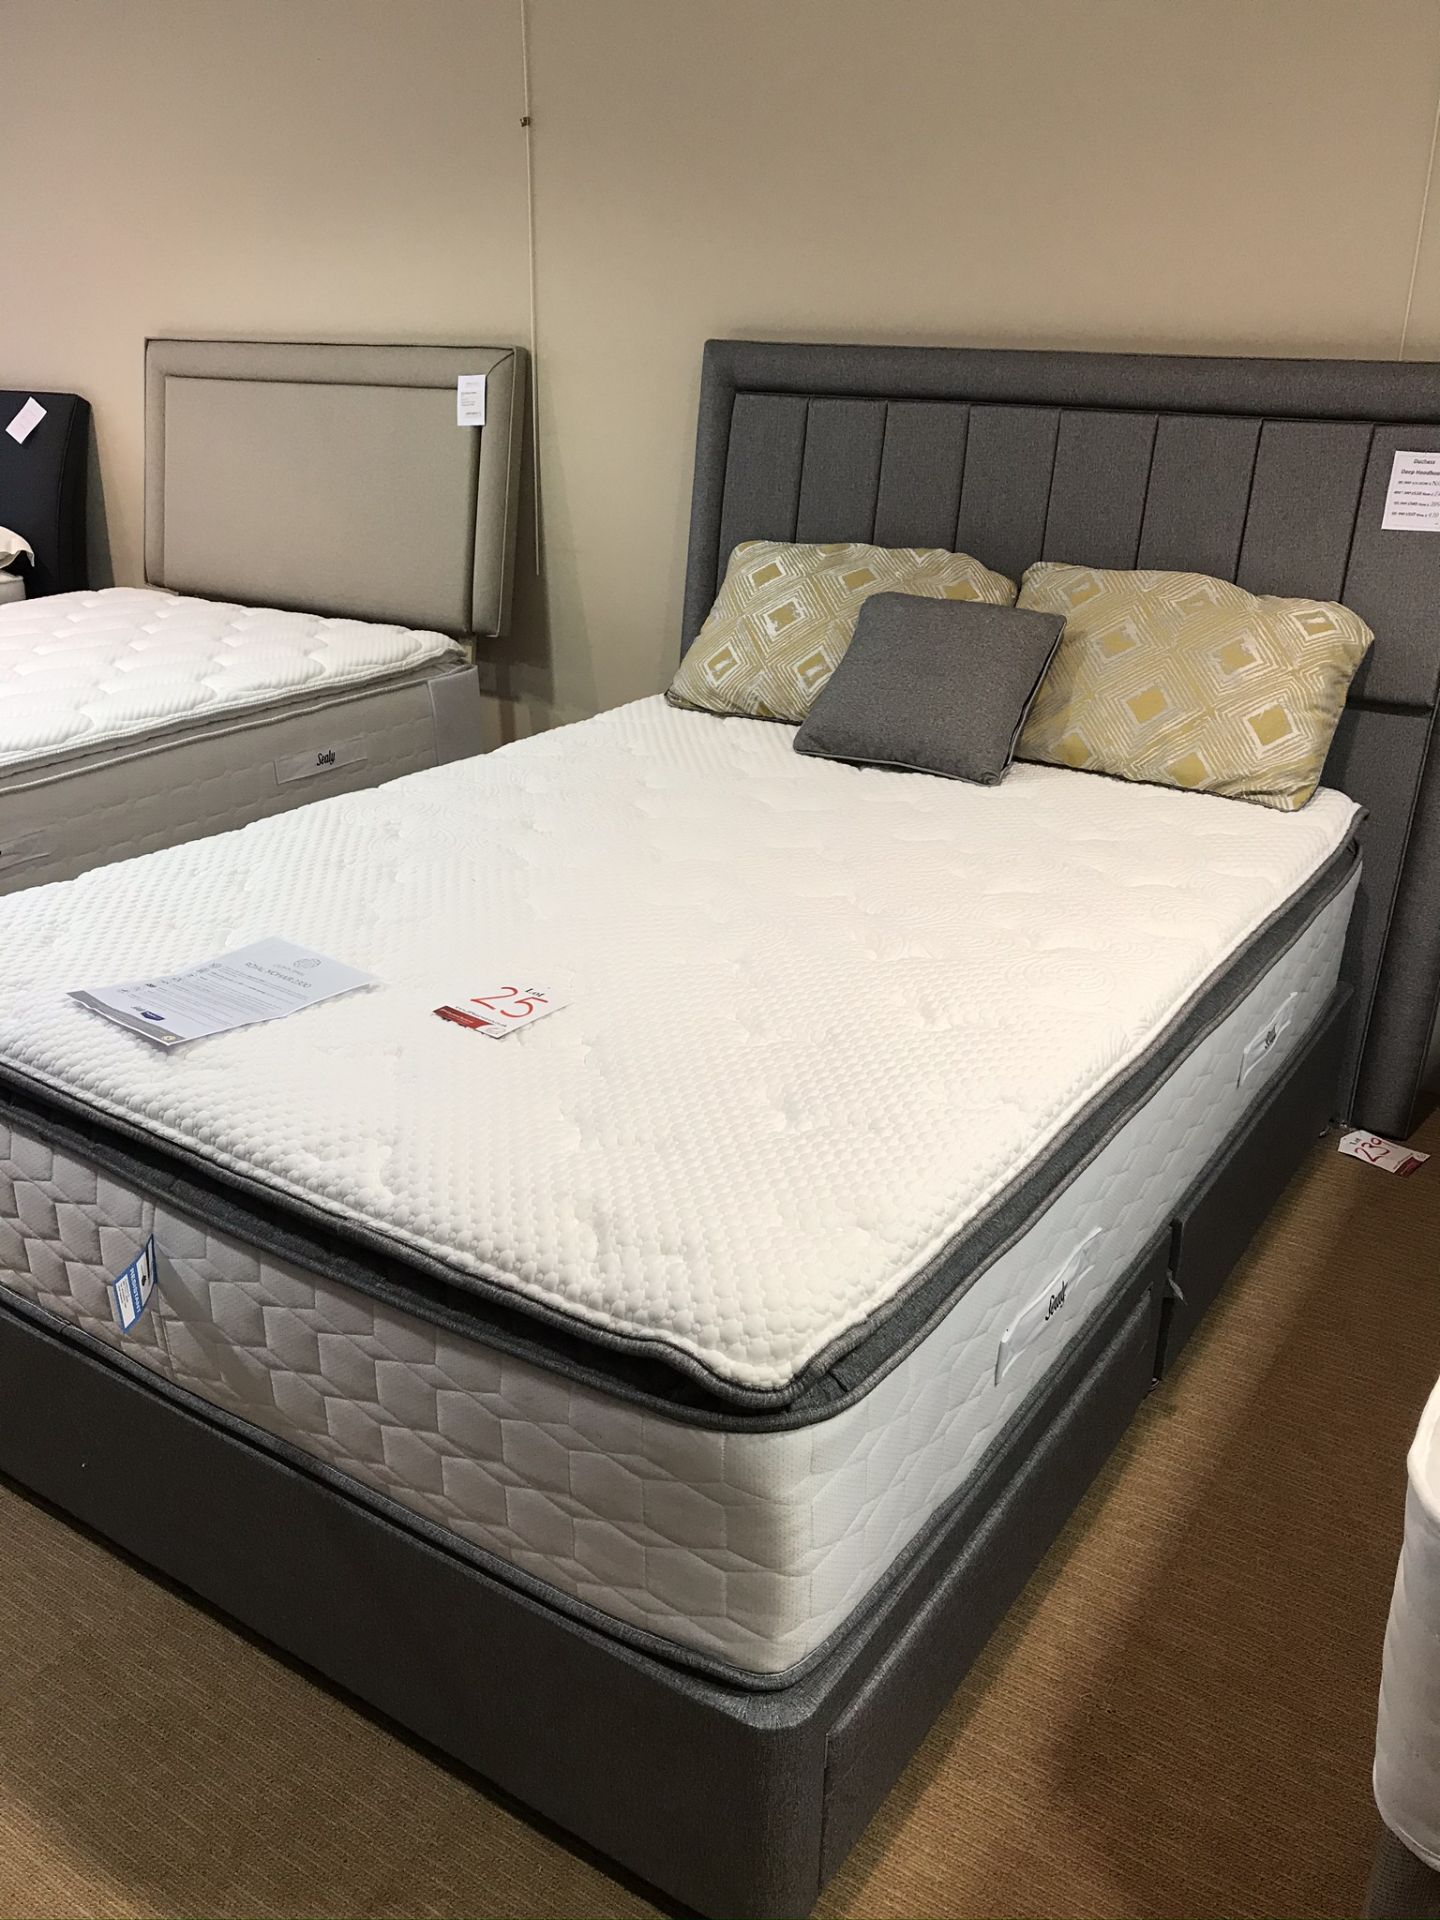 Ex Display Sealy Royal Mohair 2300 King Size Mattress w/ 2 Drawer Bed Frame & Headboard in Stardust - Image 2 of 3